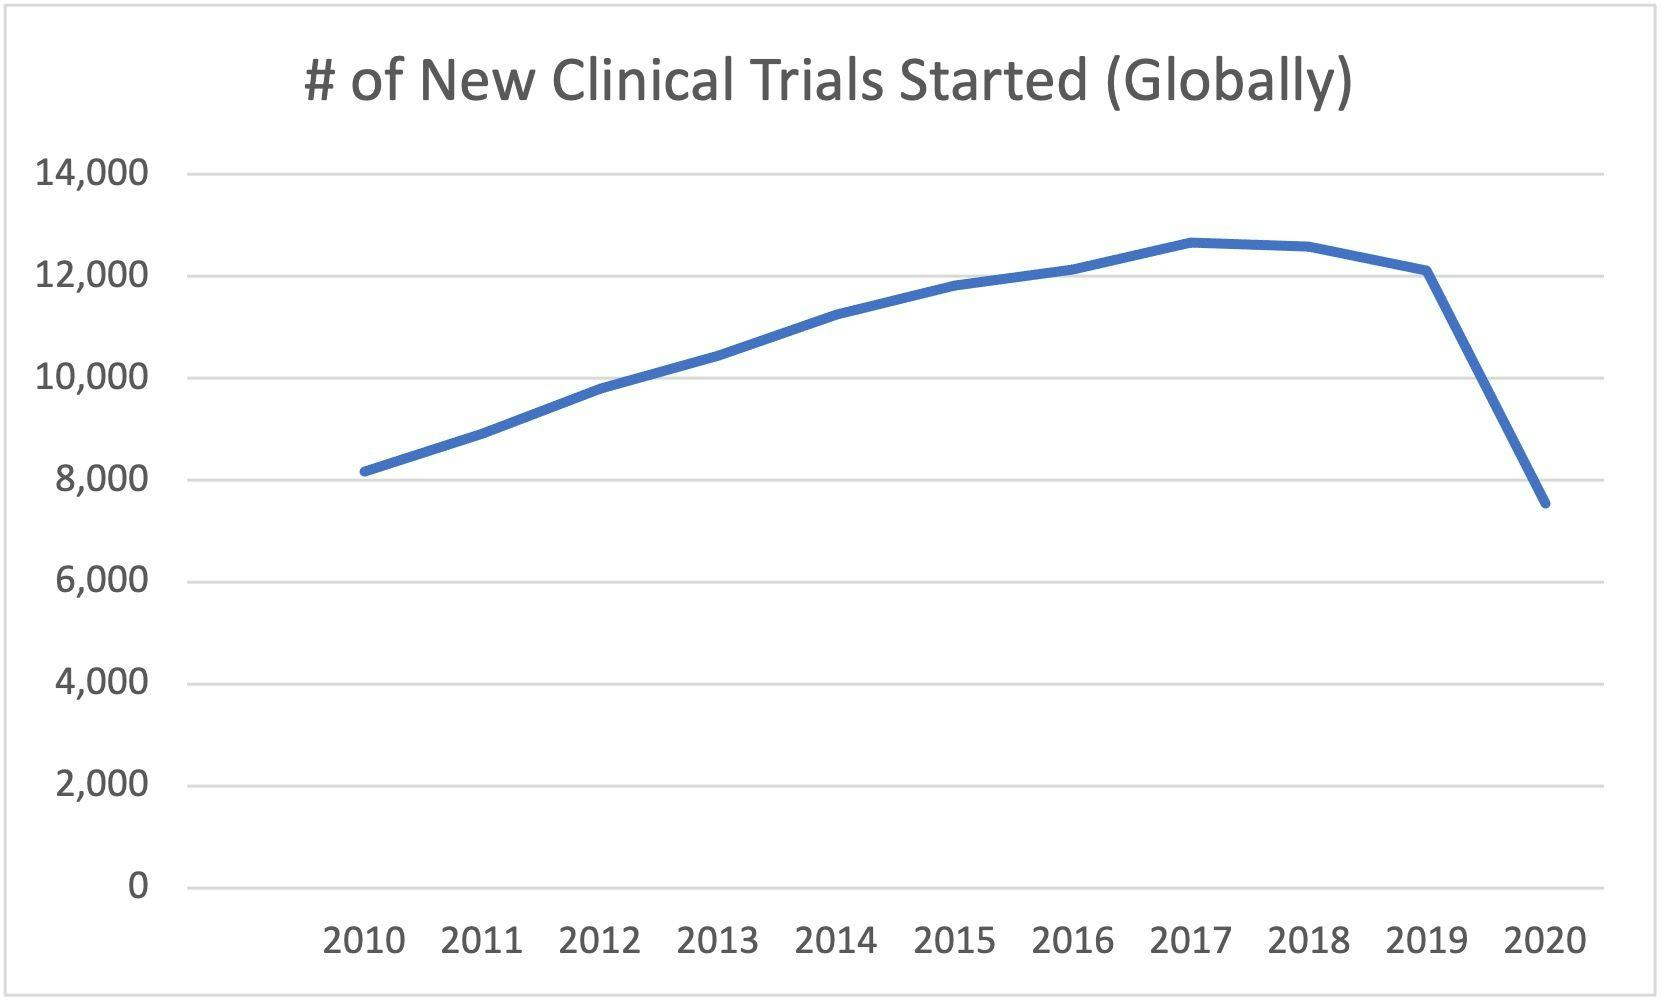 2020 Experienced 38% Drop in New Trials